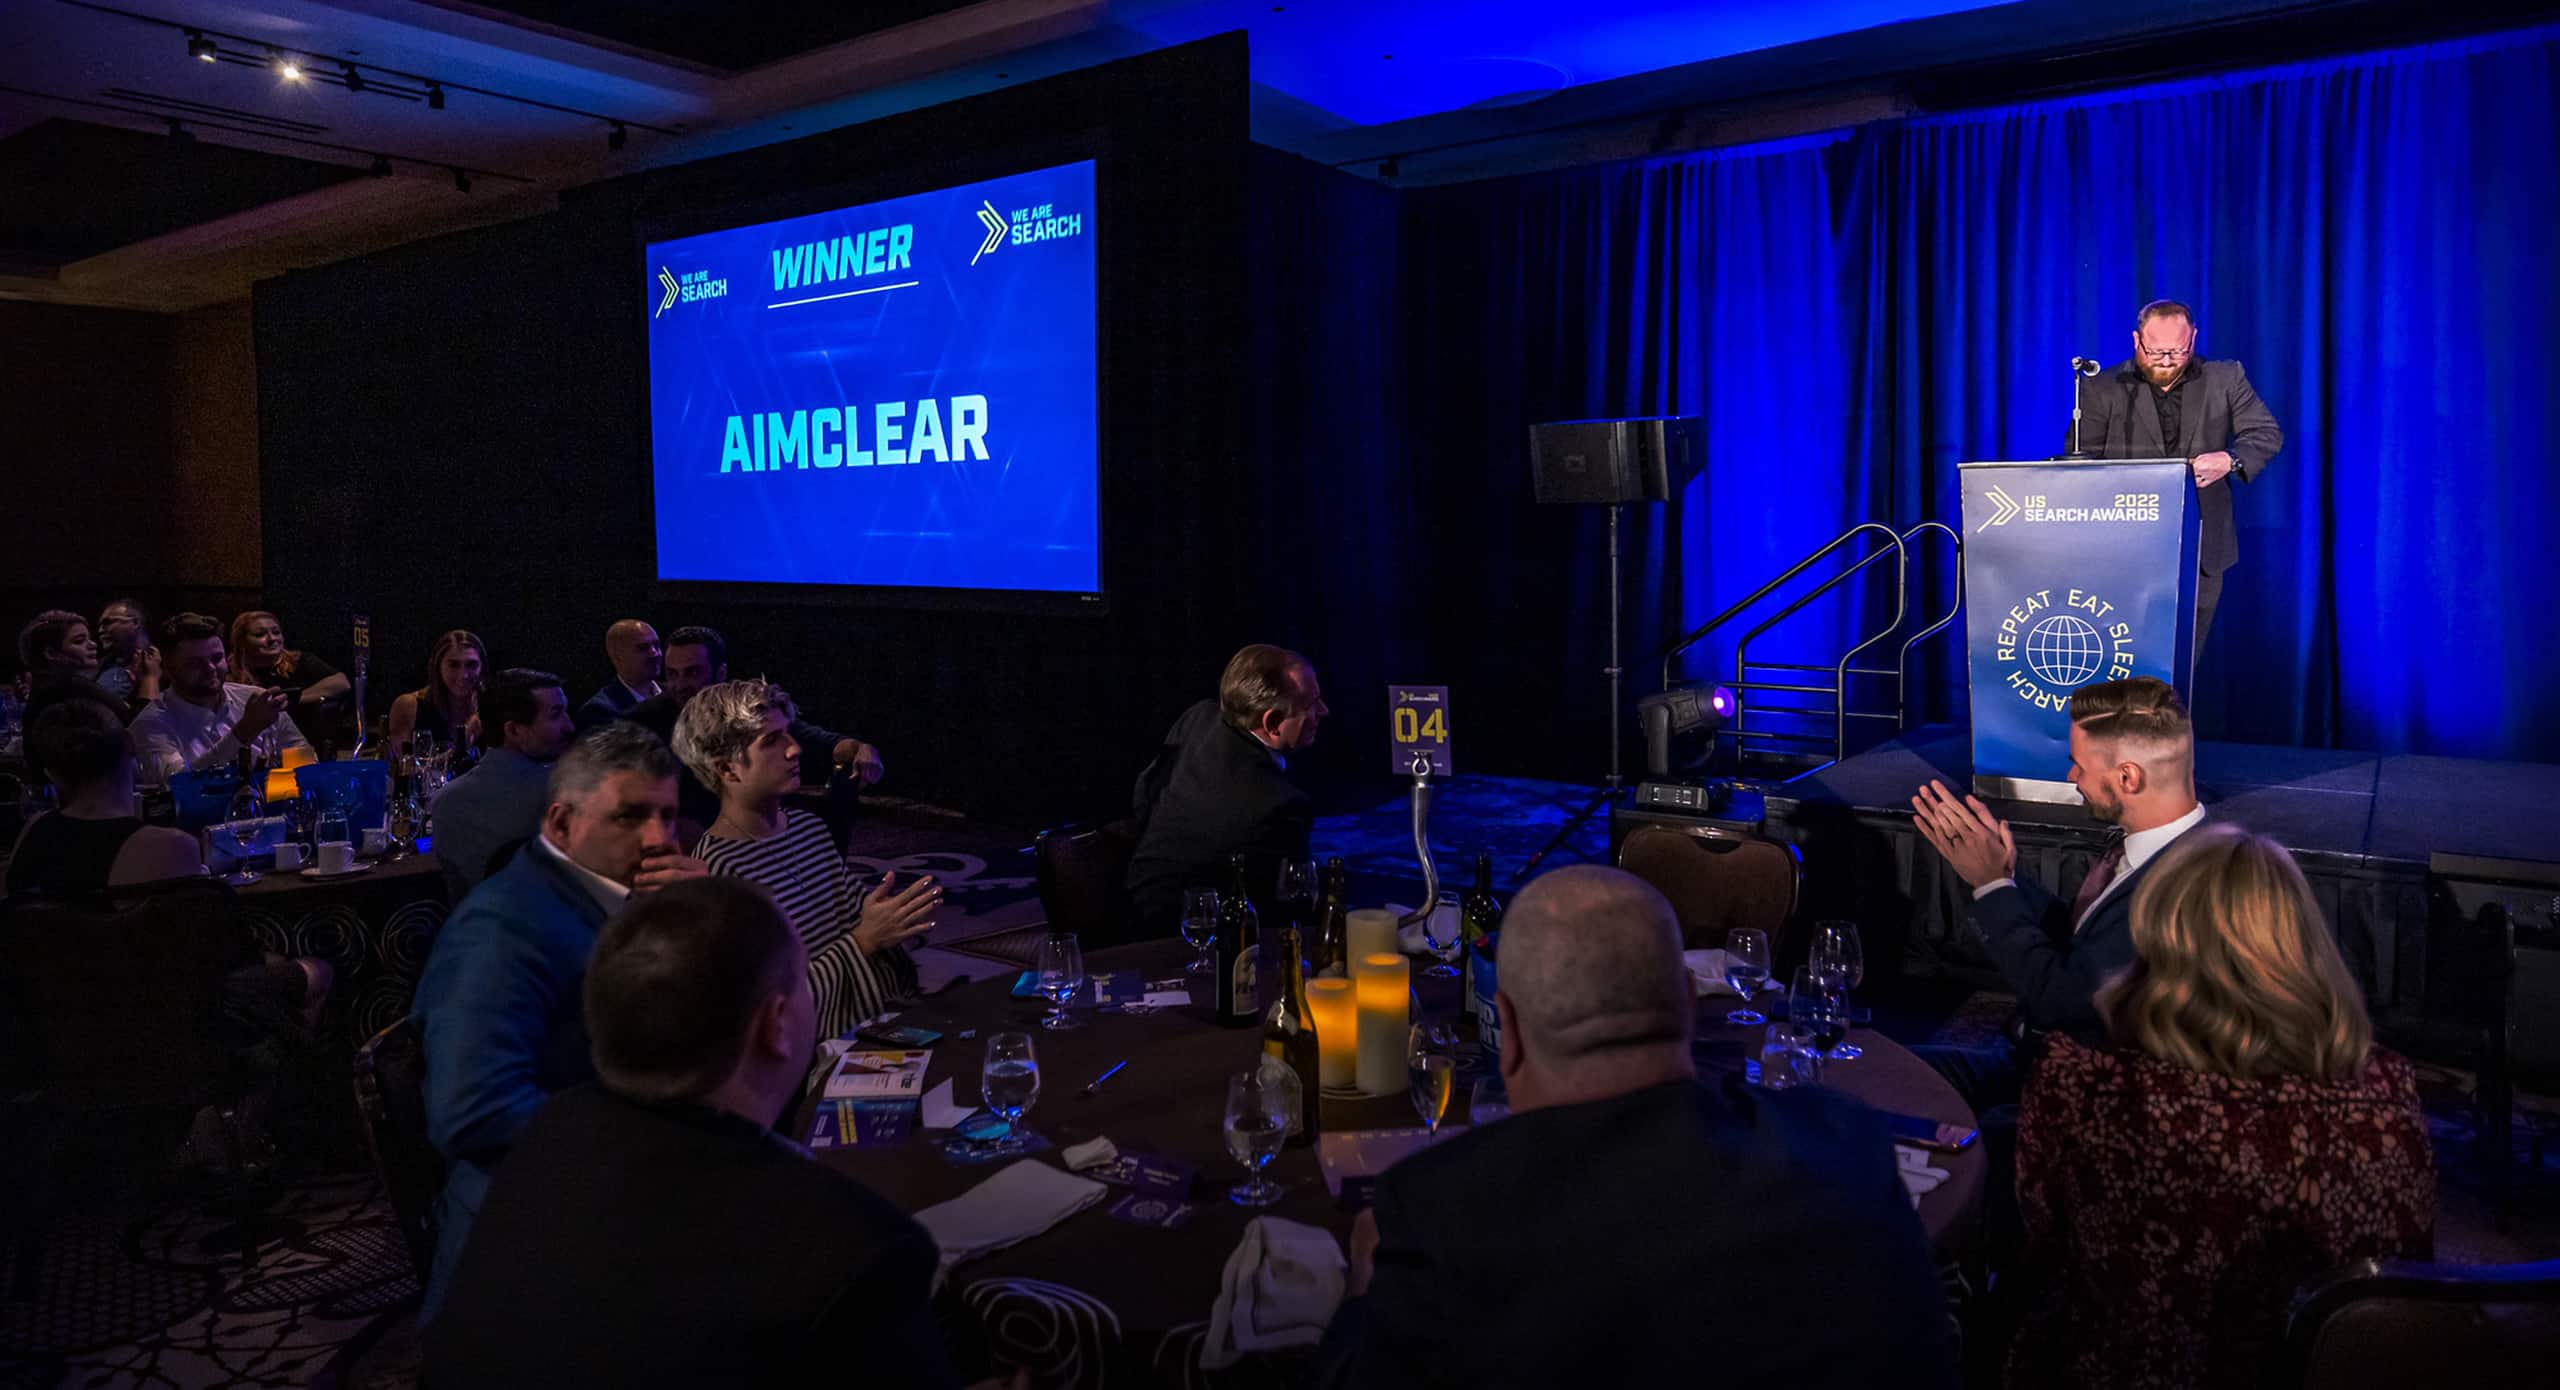 "Aimclear" appears on the big screen at the 2022 US Search Awards.